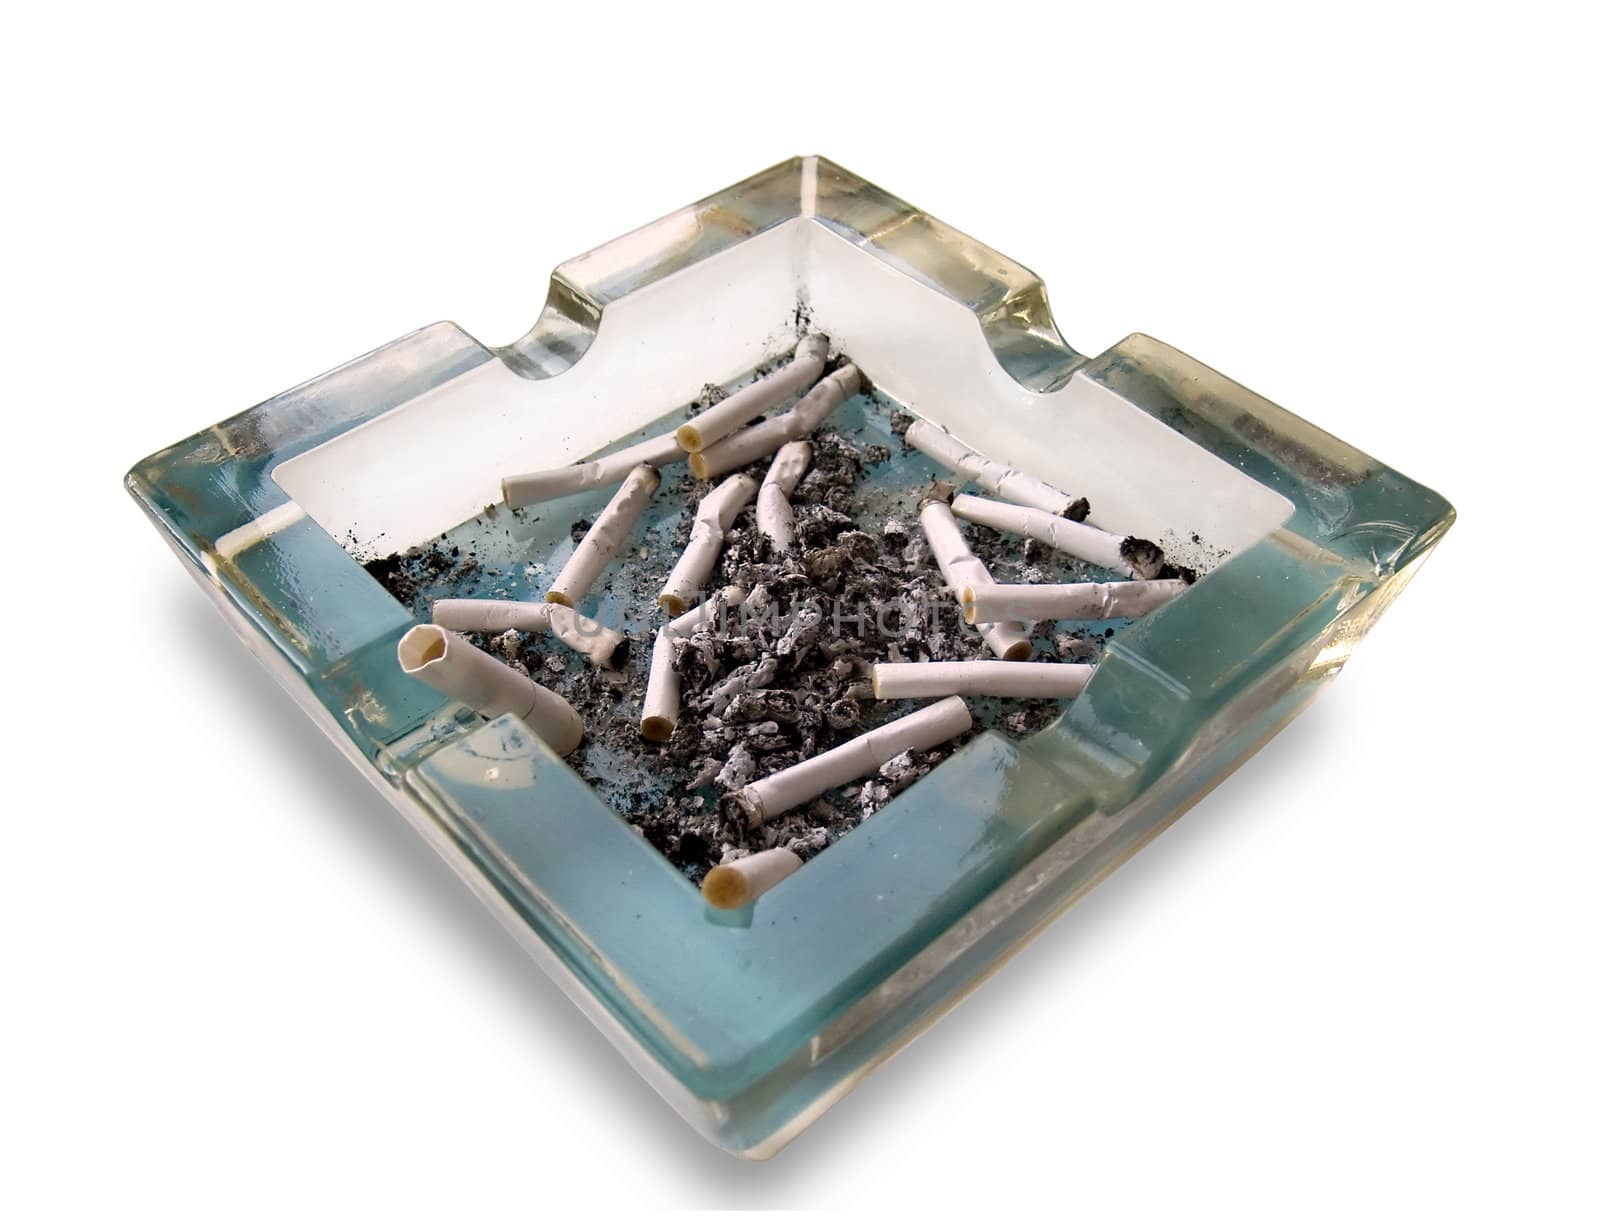 The large glass ashtray full of cigarette butts.